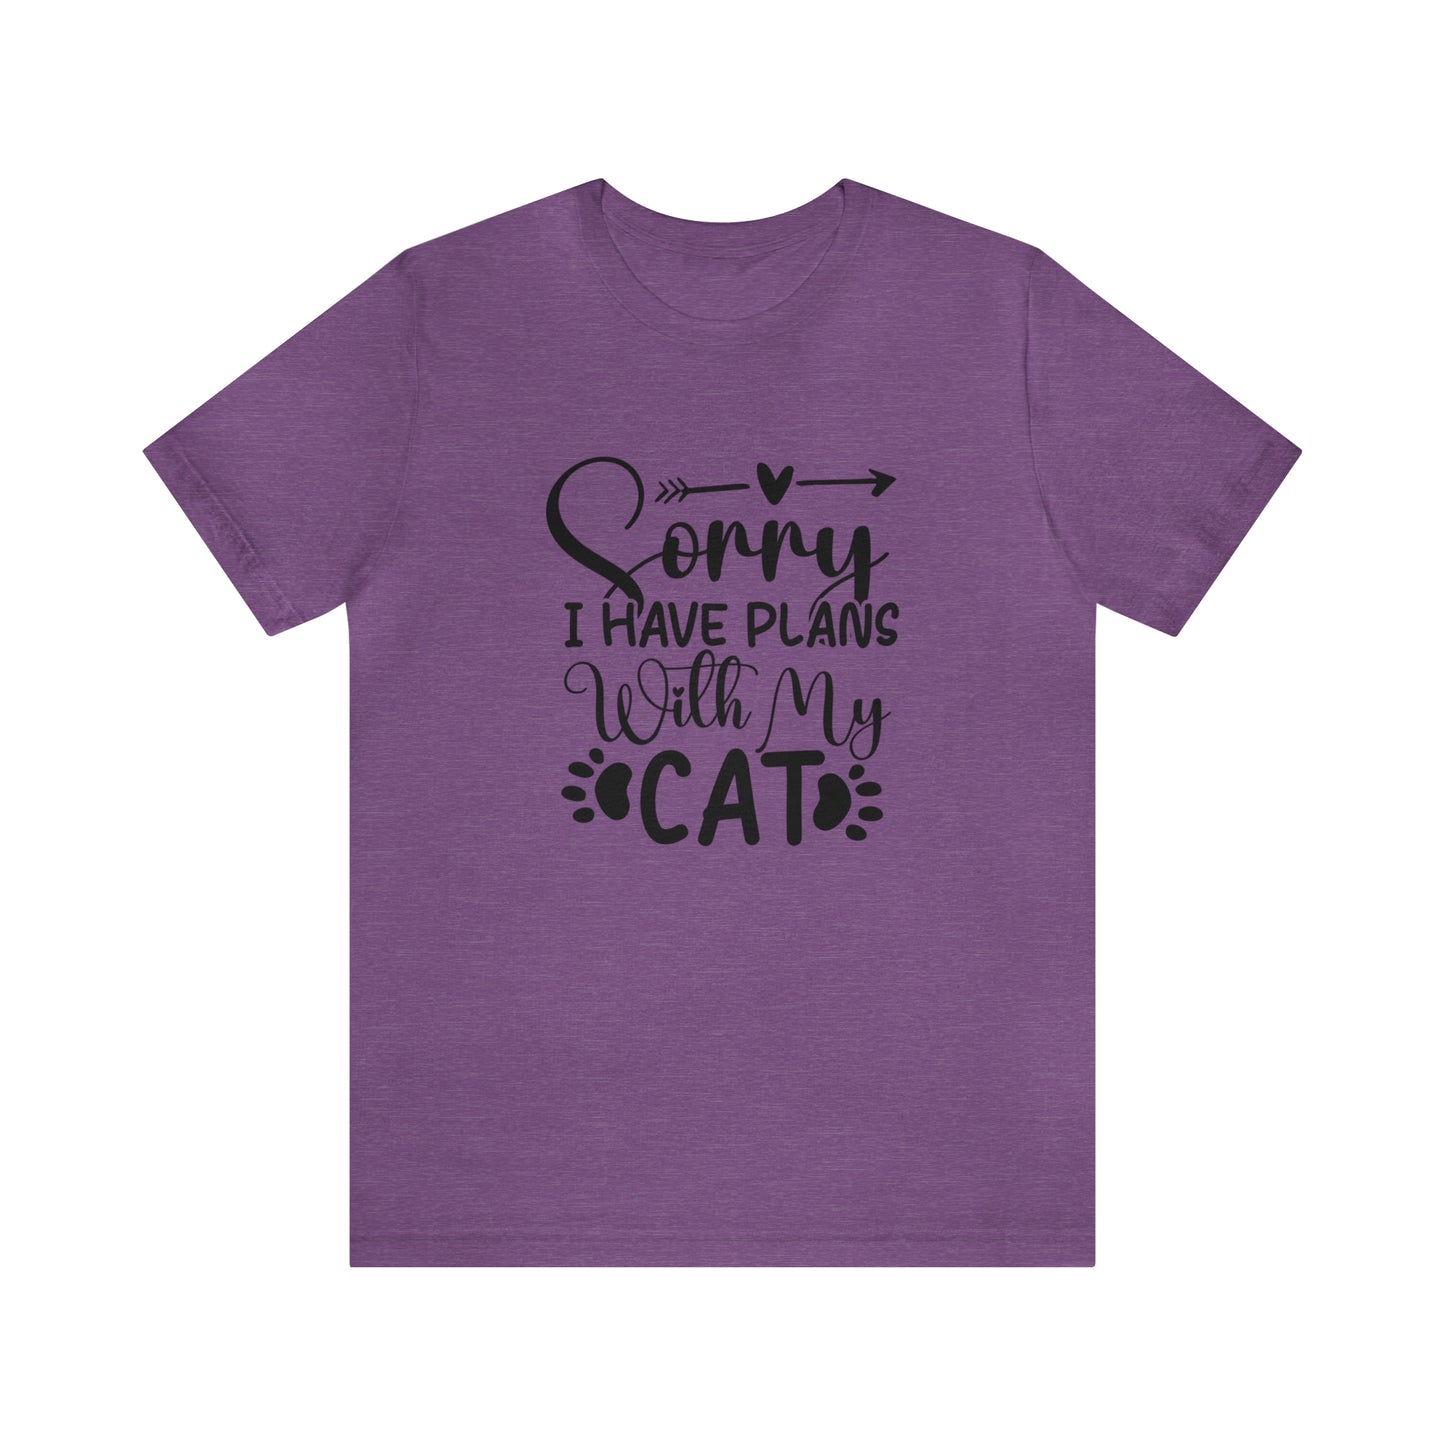 Sorry I have plans with my cat Short Sleeve Women's Tee